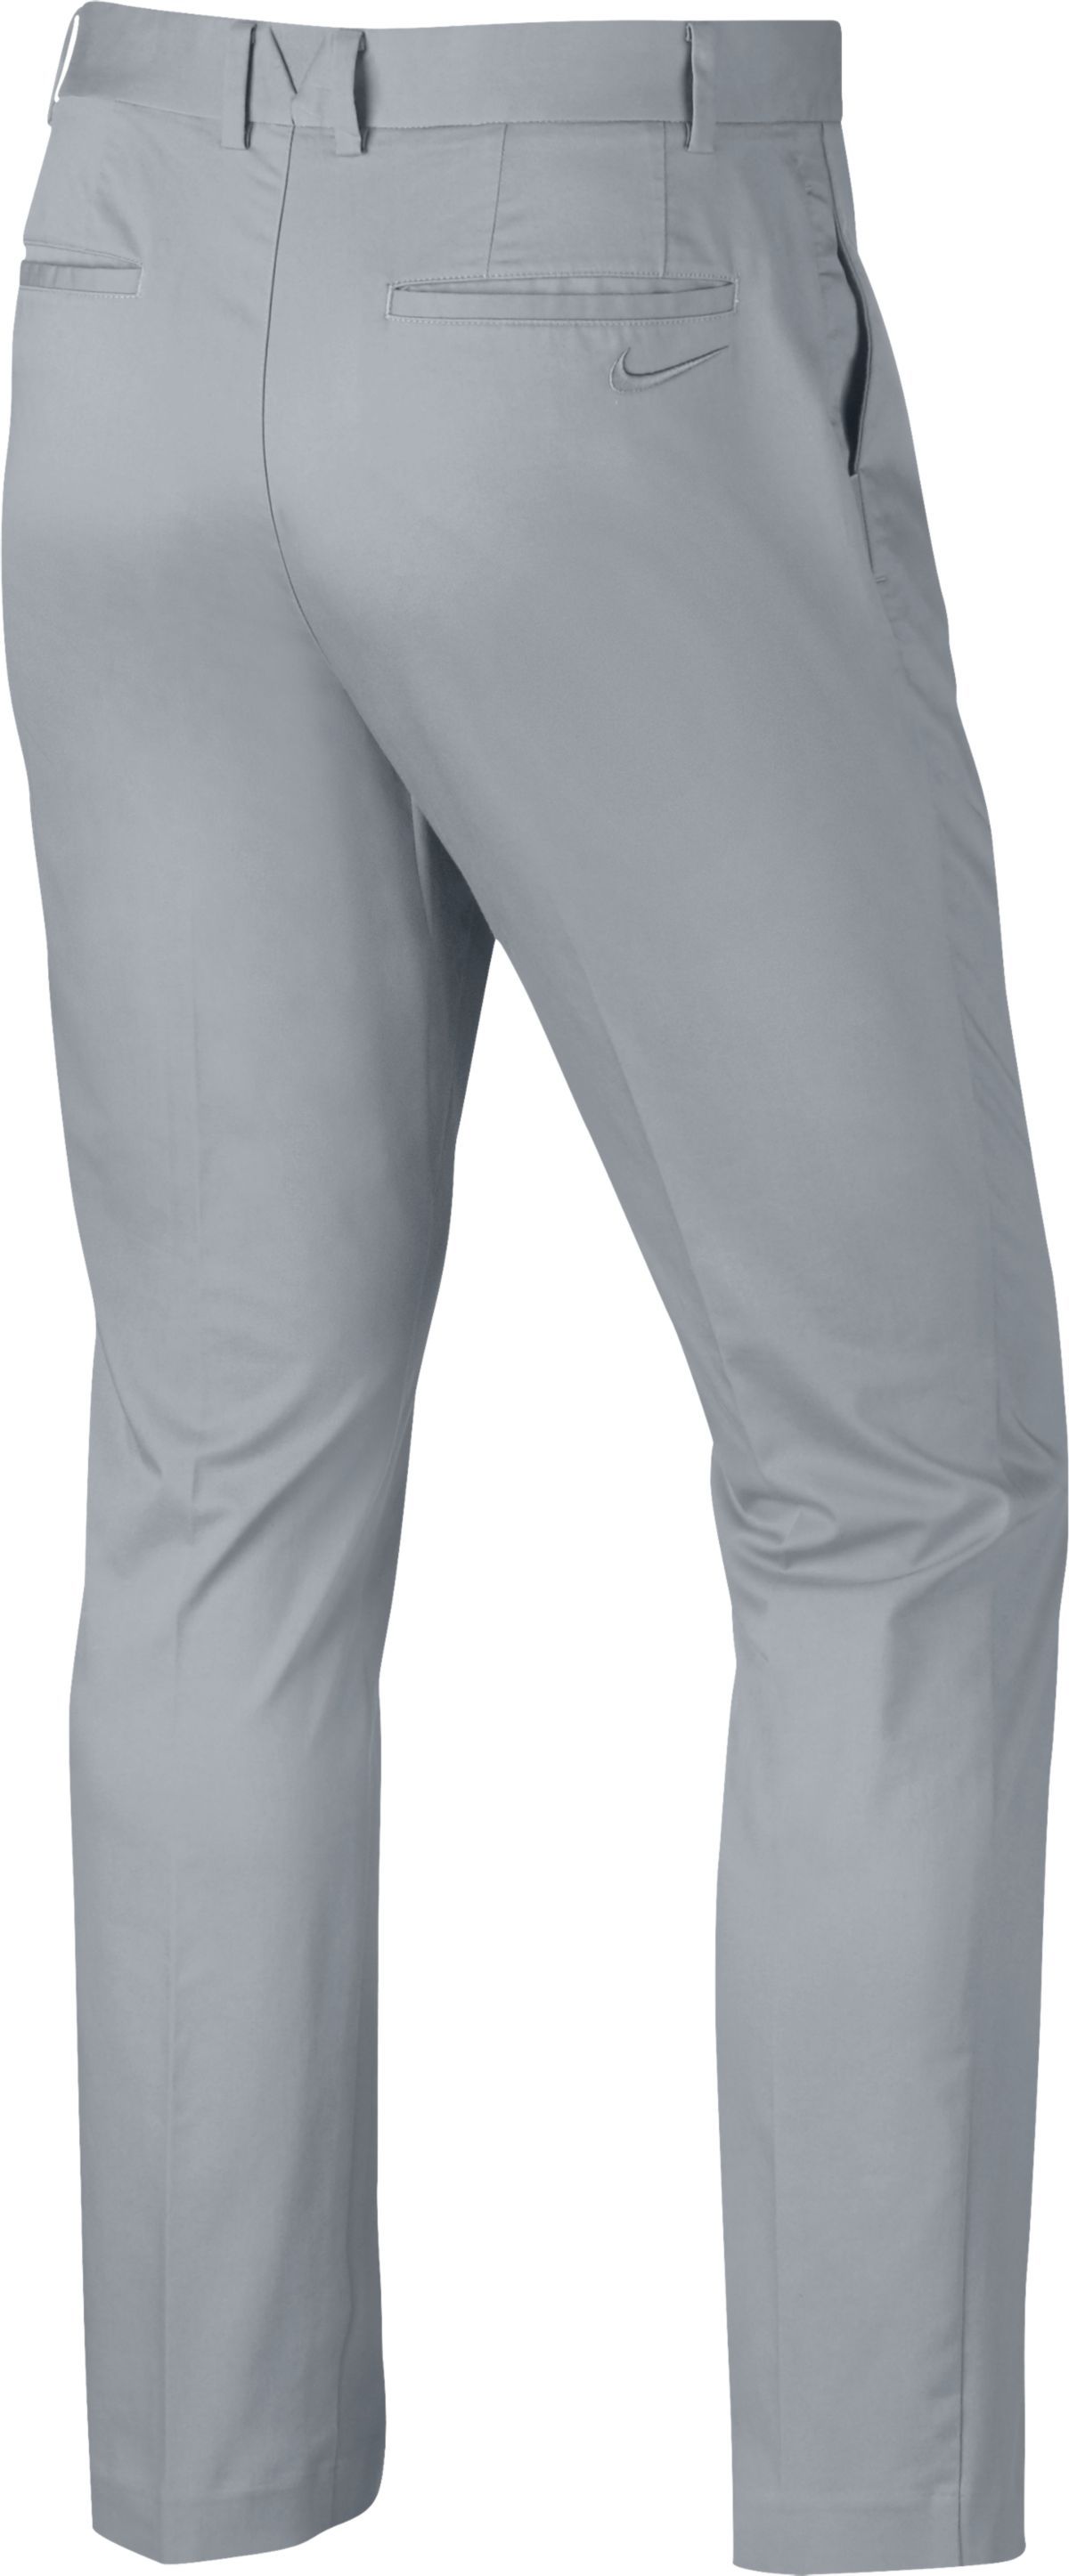 Nike Modern Fit Washed Pant 833190 